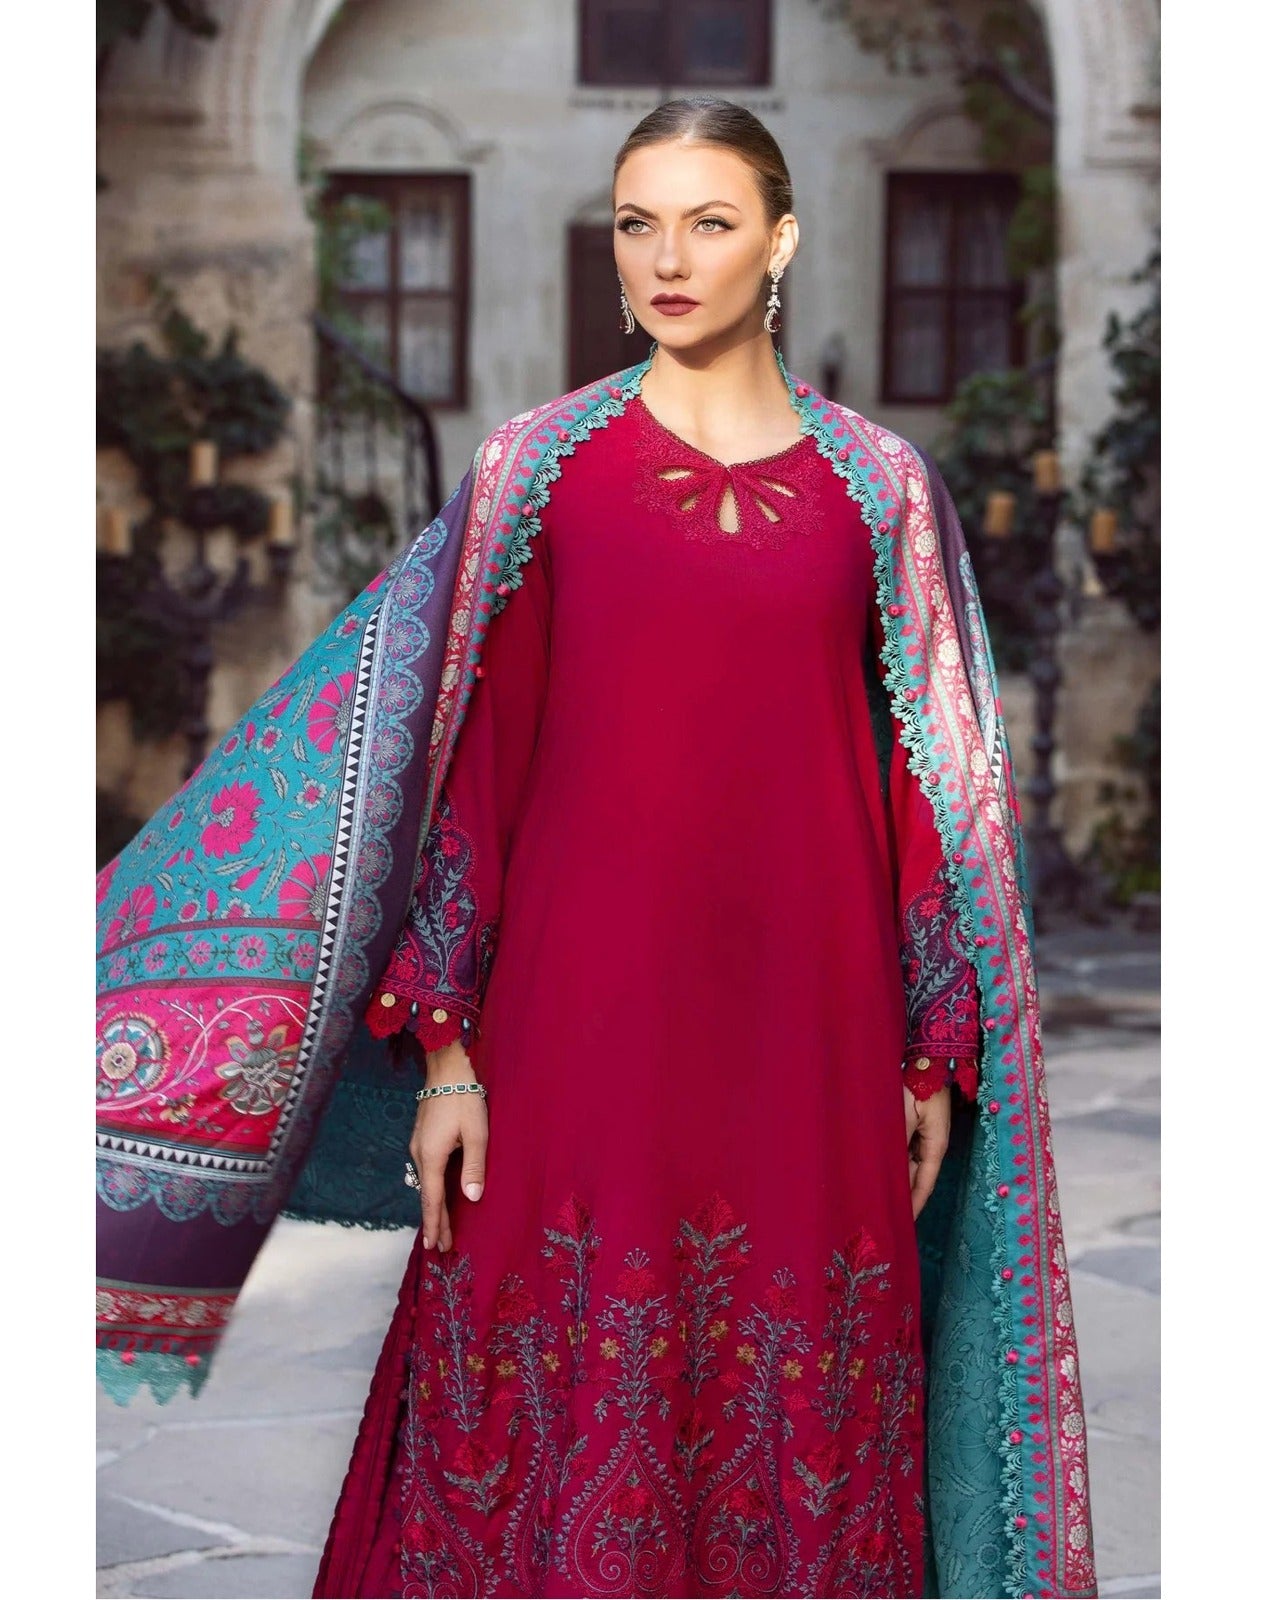 MARIA B LAWN EMBROIDERY DRESS WITH PRINTED SHAWL 3 PIECE UNSTITCHED